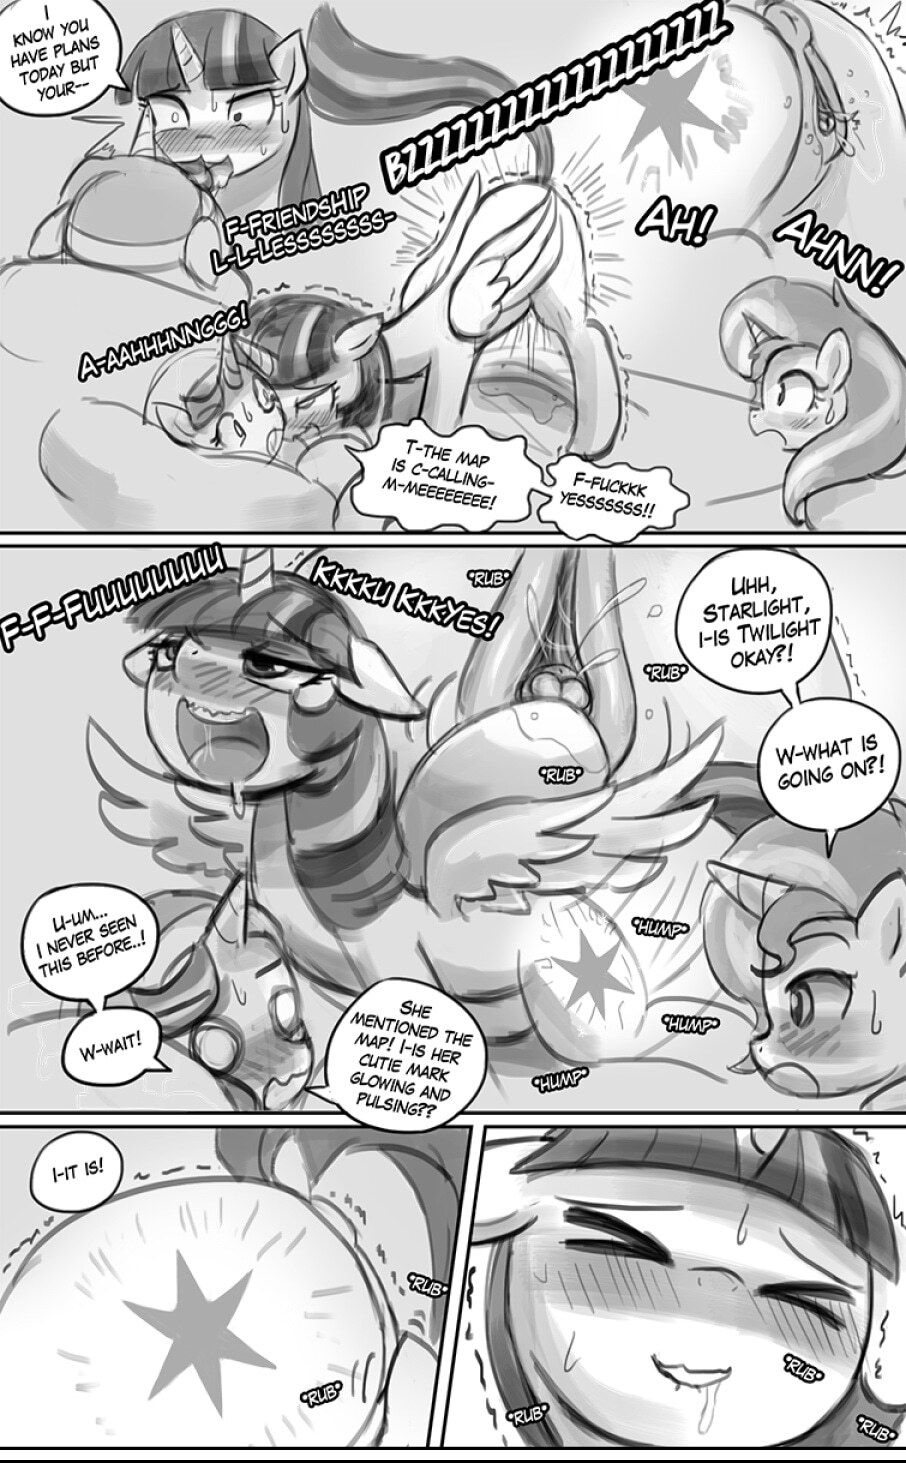 Homesick Part 2: Hearth's Warming Eve - Page 5